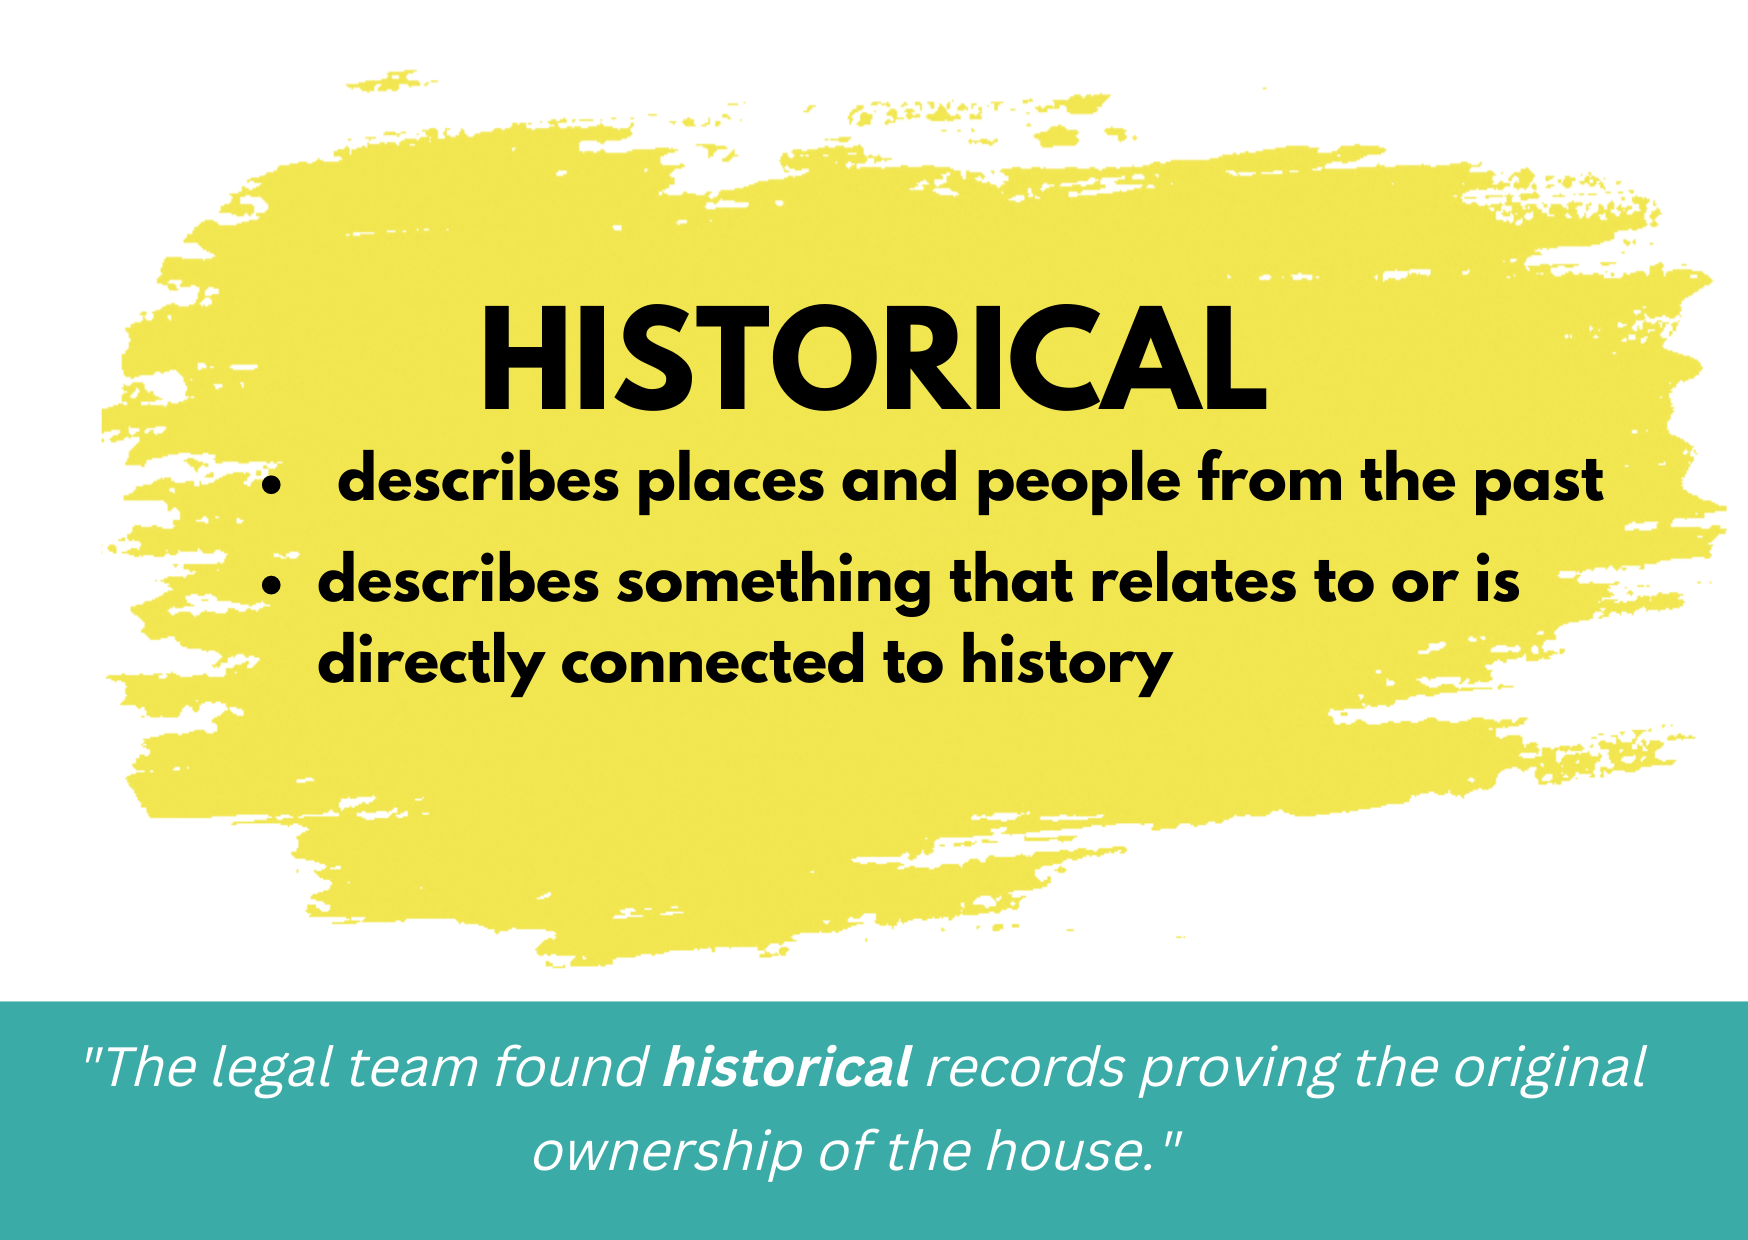 A graphic describes the word Historical and gives an example of the word being used.